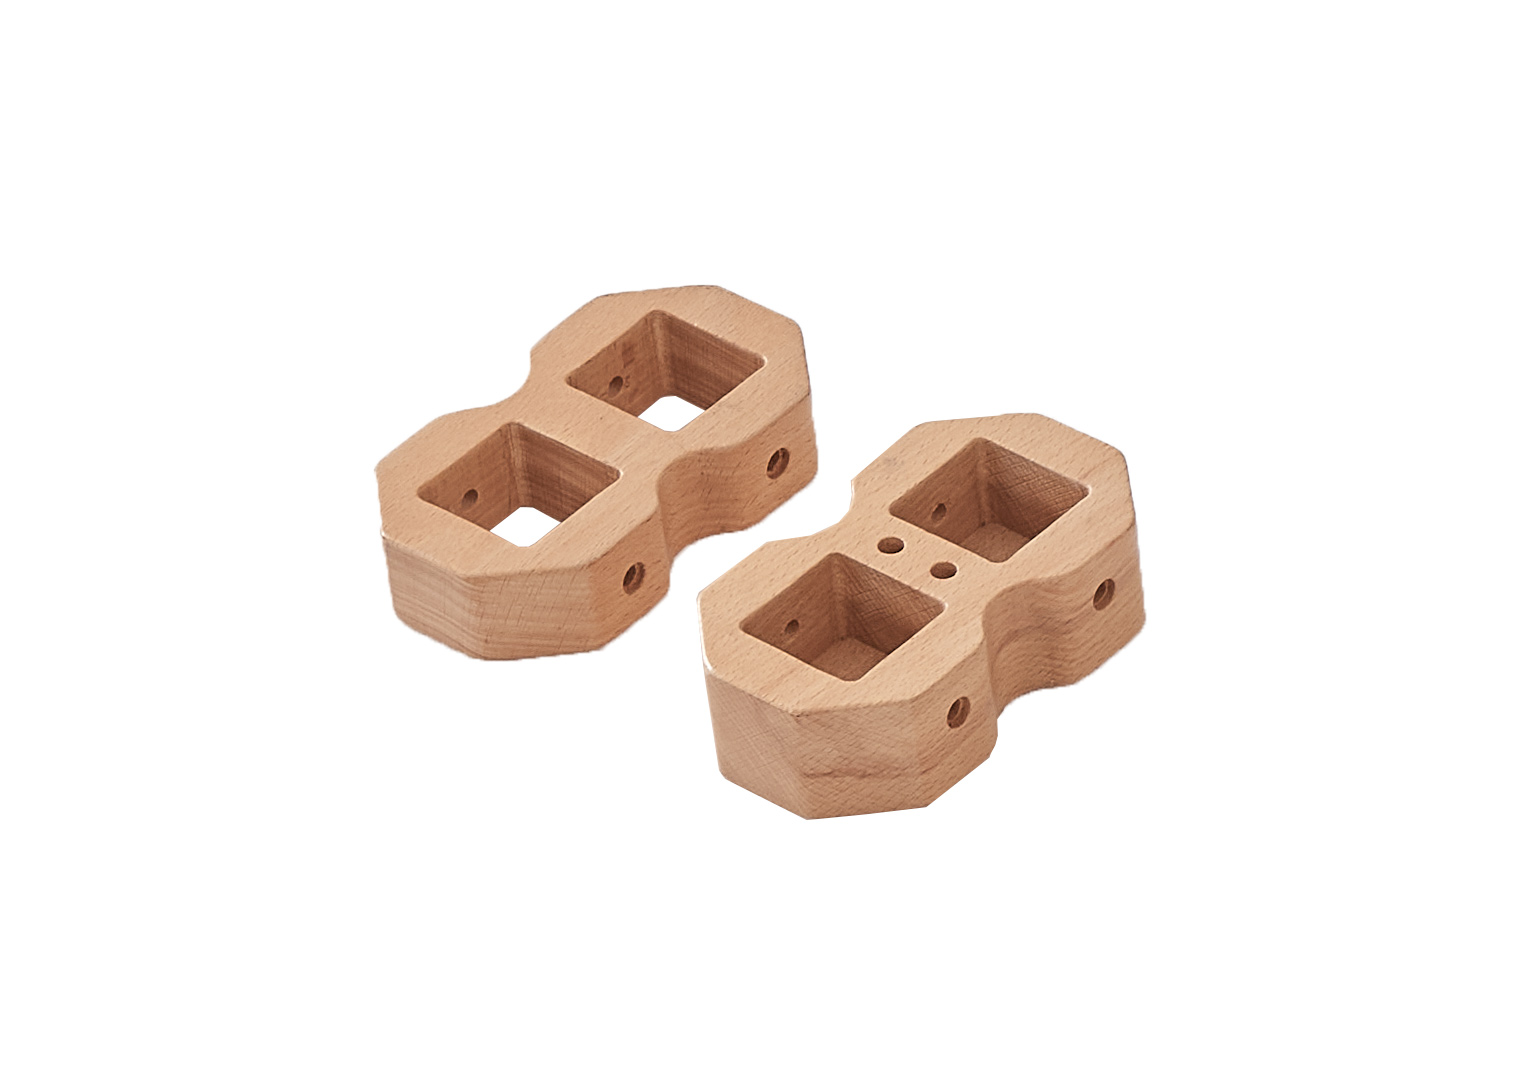 Type II Connector 2-Piece Set - 2 Panels of Equal Heights at 90°/180° Inner Angle